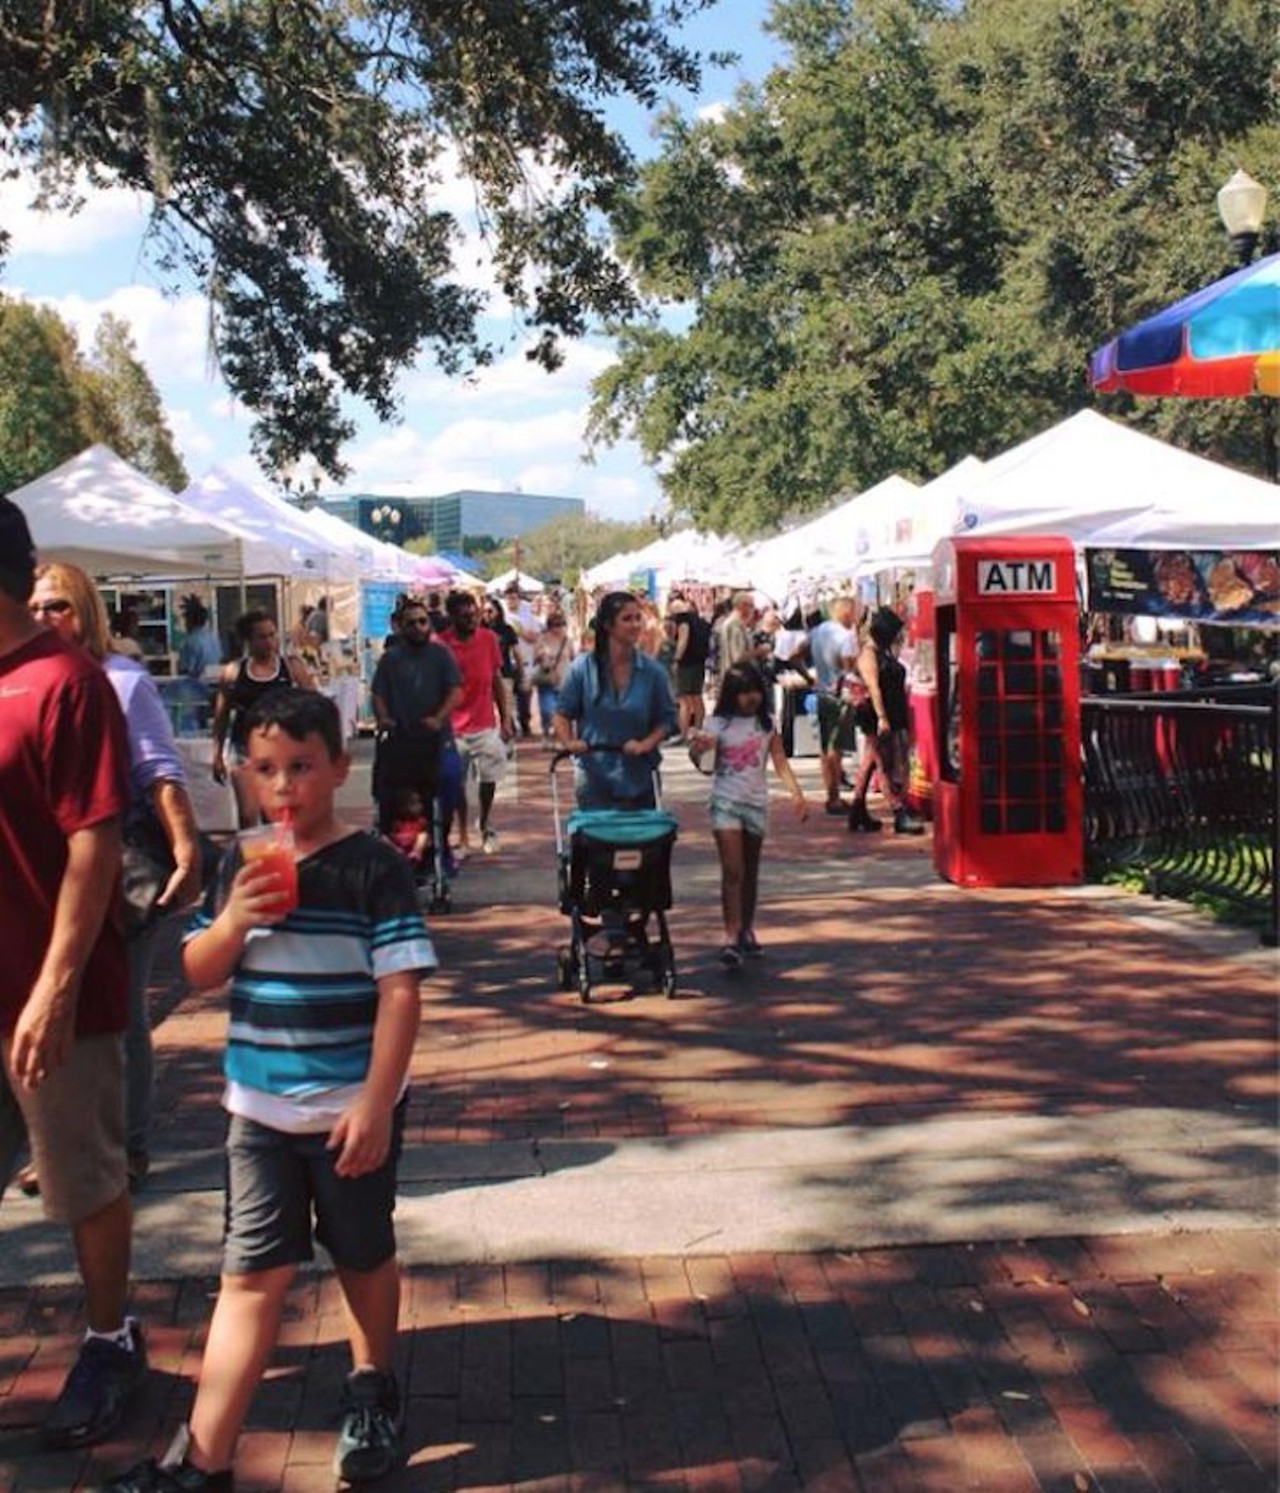 Orlando Farmer&#146;s Market  
Lake Eola Park on the Corner of E. Central Blvd and N. Eola Drive.
The whole family (pets included) are invited to this weekly event every Sunday at Lake Eola from 10 a.m. to 4 p.m. Enjoy bottomless mimosas while your kid gets their face painted or run around in the massive play gym. It&#146;s a win-win situation.
Photo via Orlando&#146;s Farmers Market via Facebook